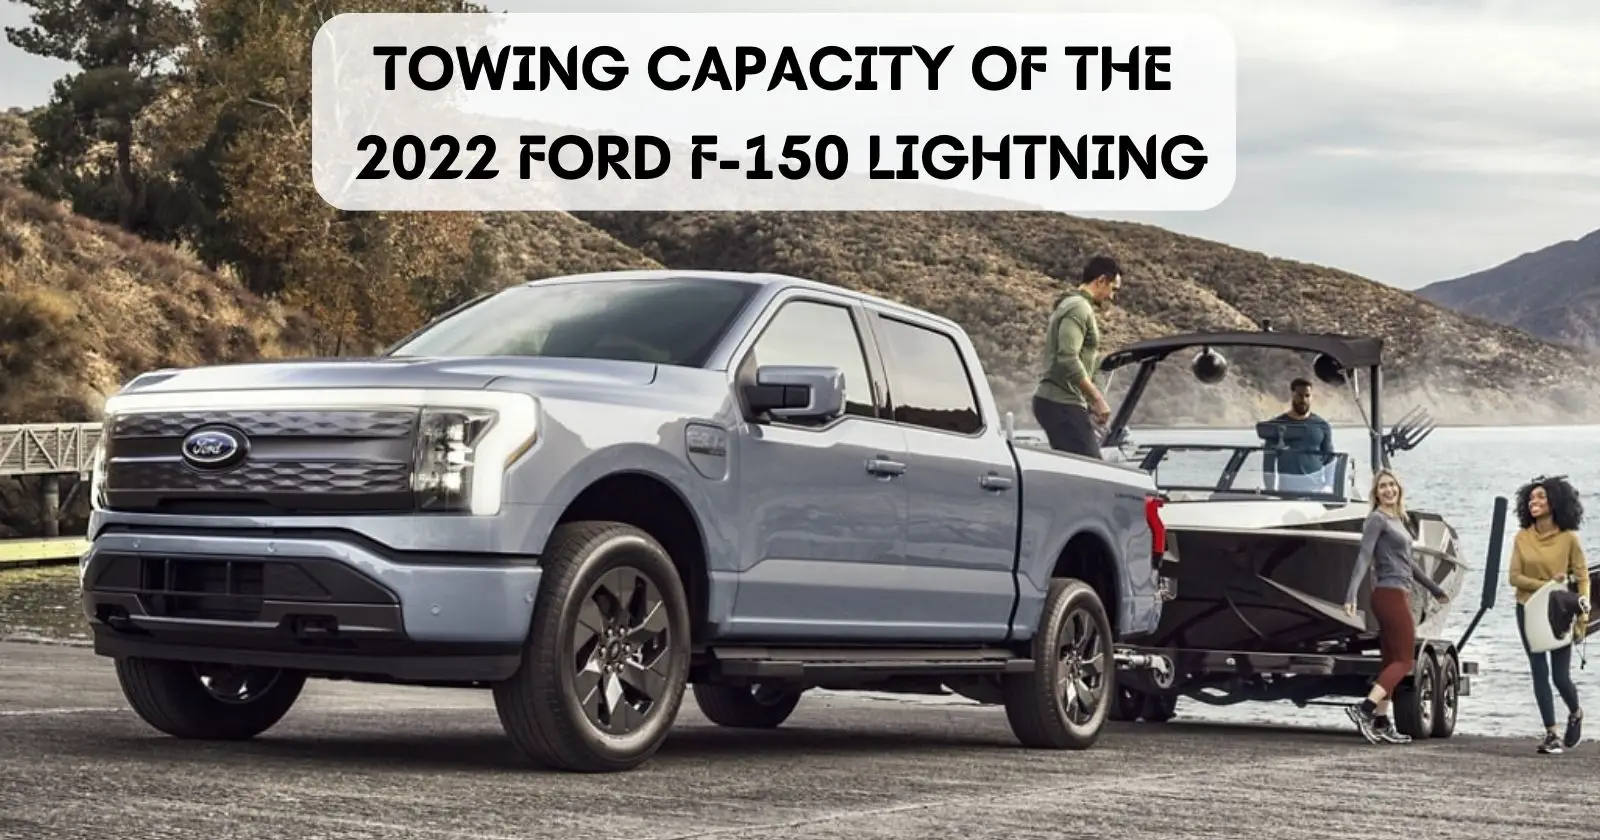 ford-f-150-lightning-towing-capacity-thecartowing